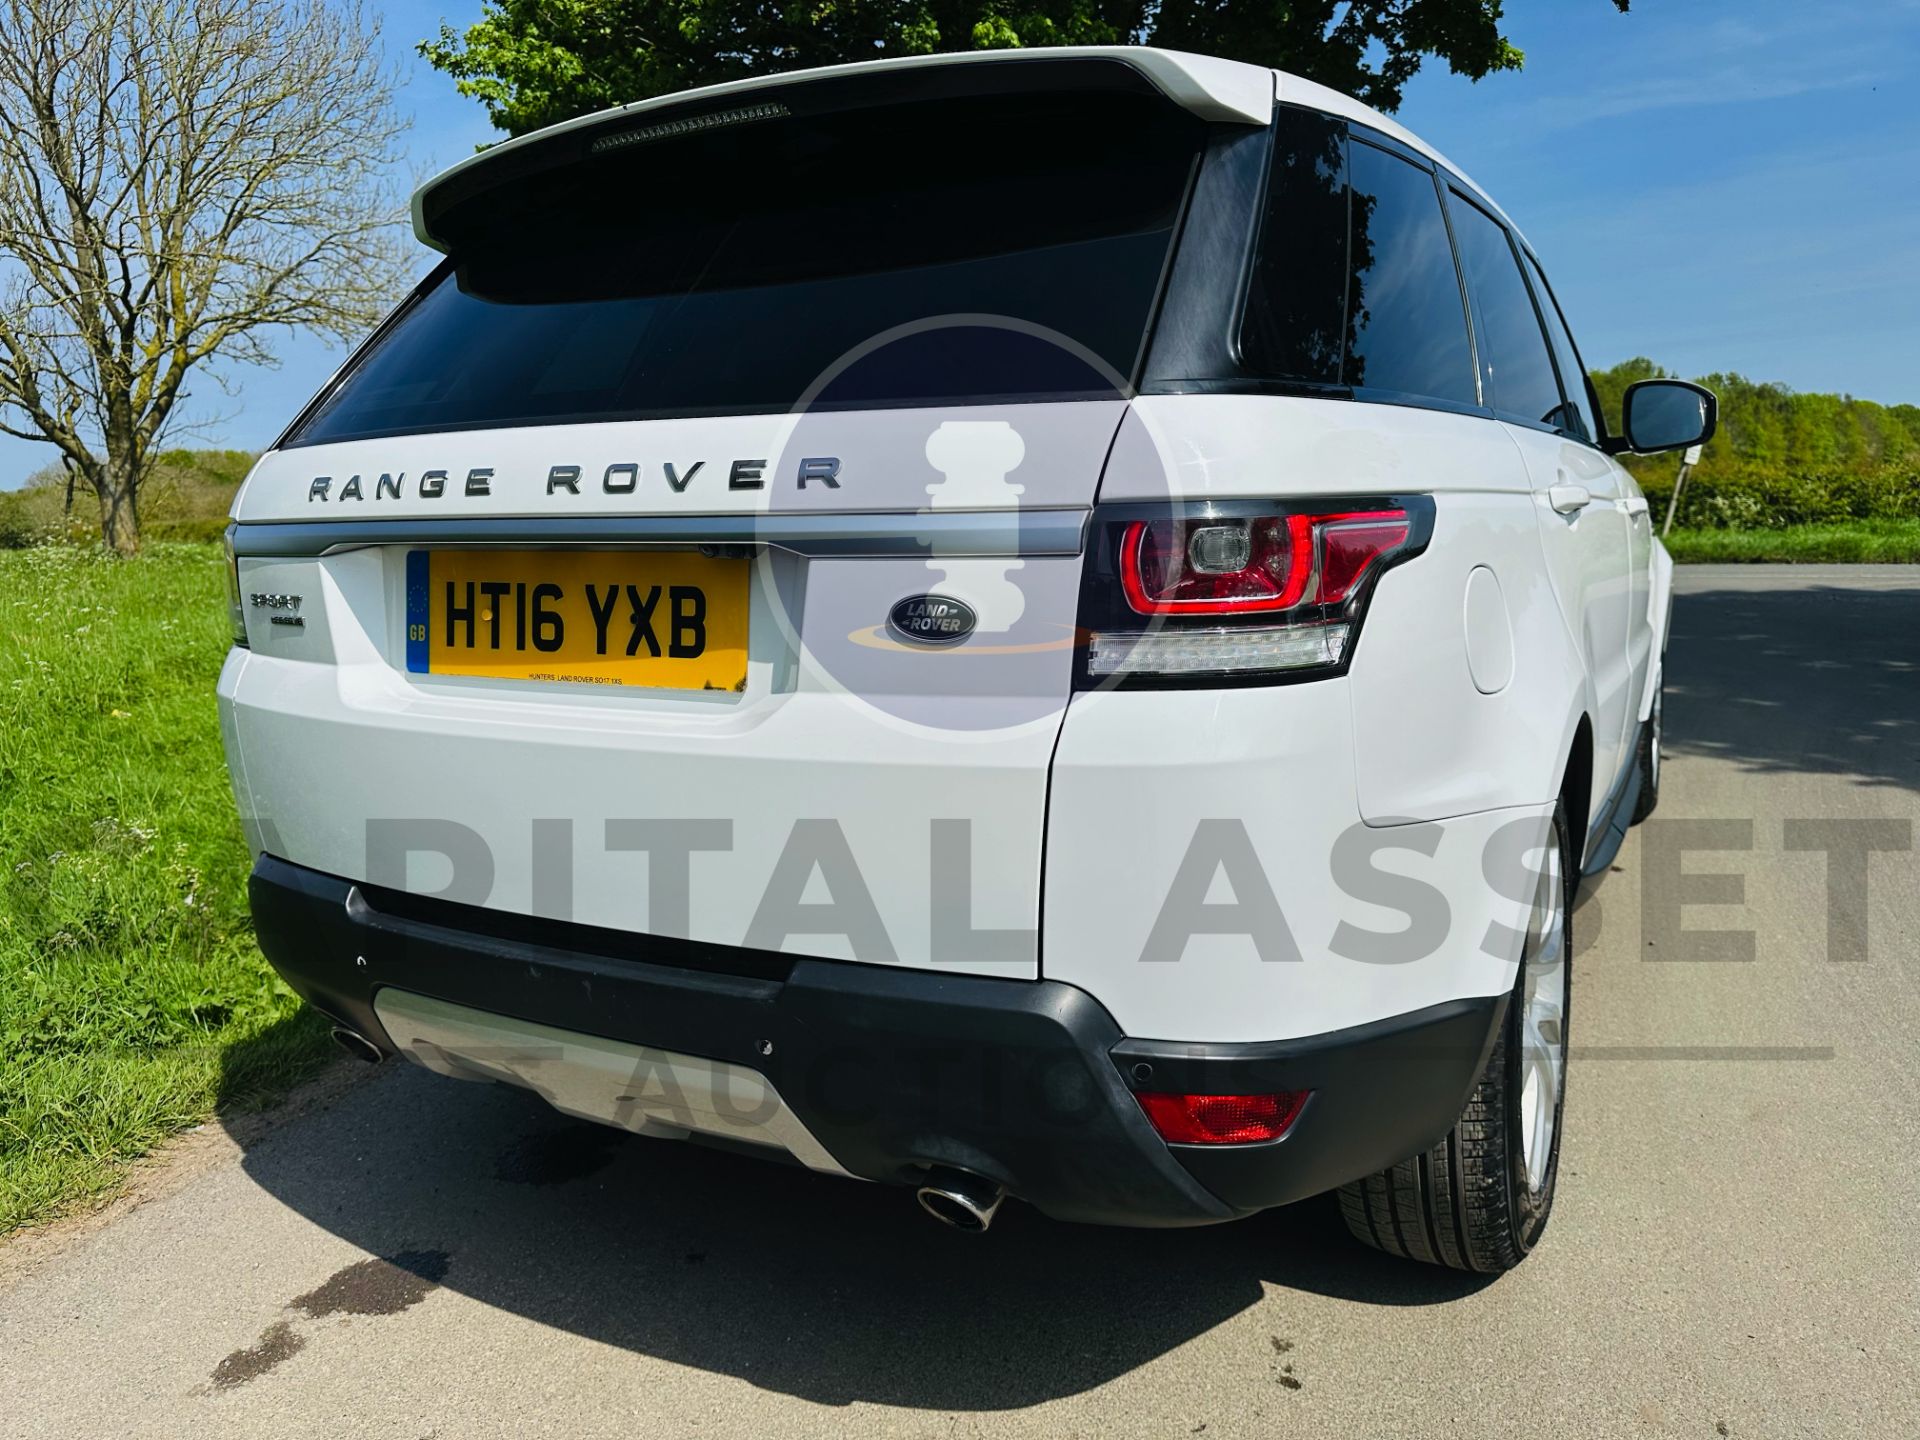 RANGE ROVER SPORT *HSE EDITION* (2016 - FACELIFT MODEL) 3.0 SDV6 - 306 BHP - AUTOMATIC *HUGE SPEC* - Image 13 of 53